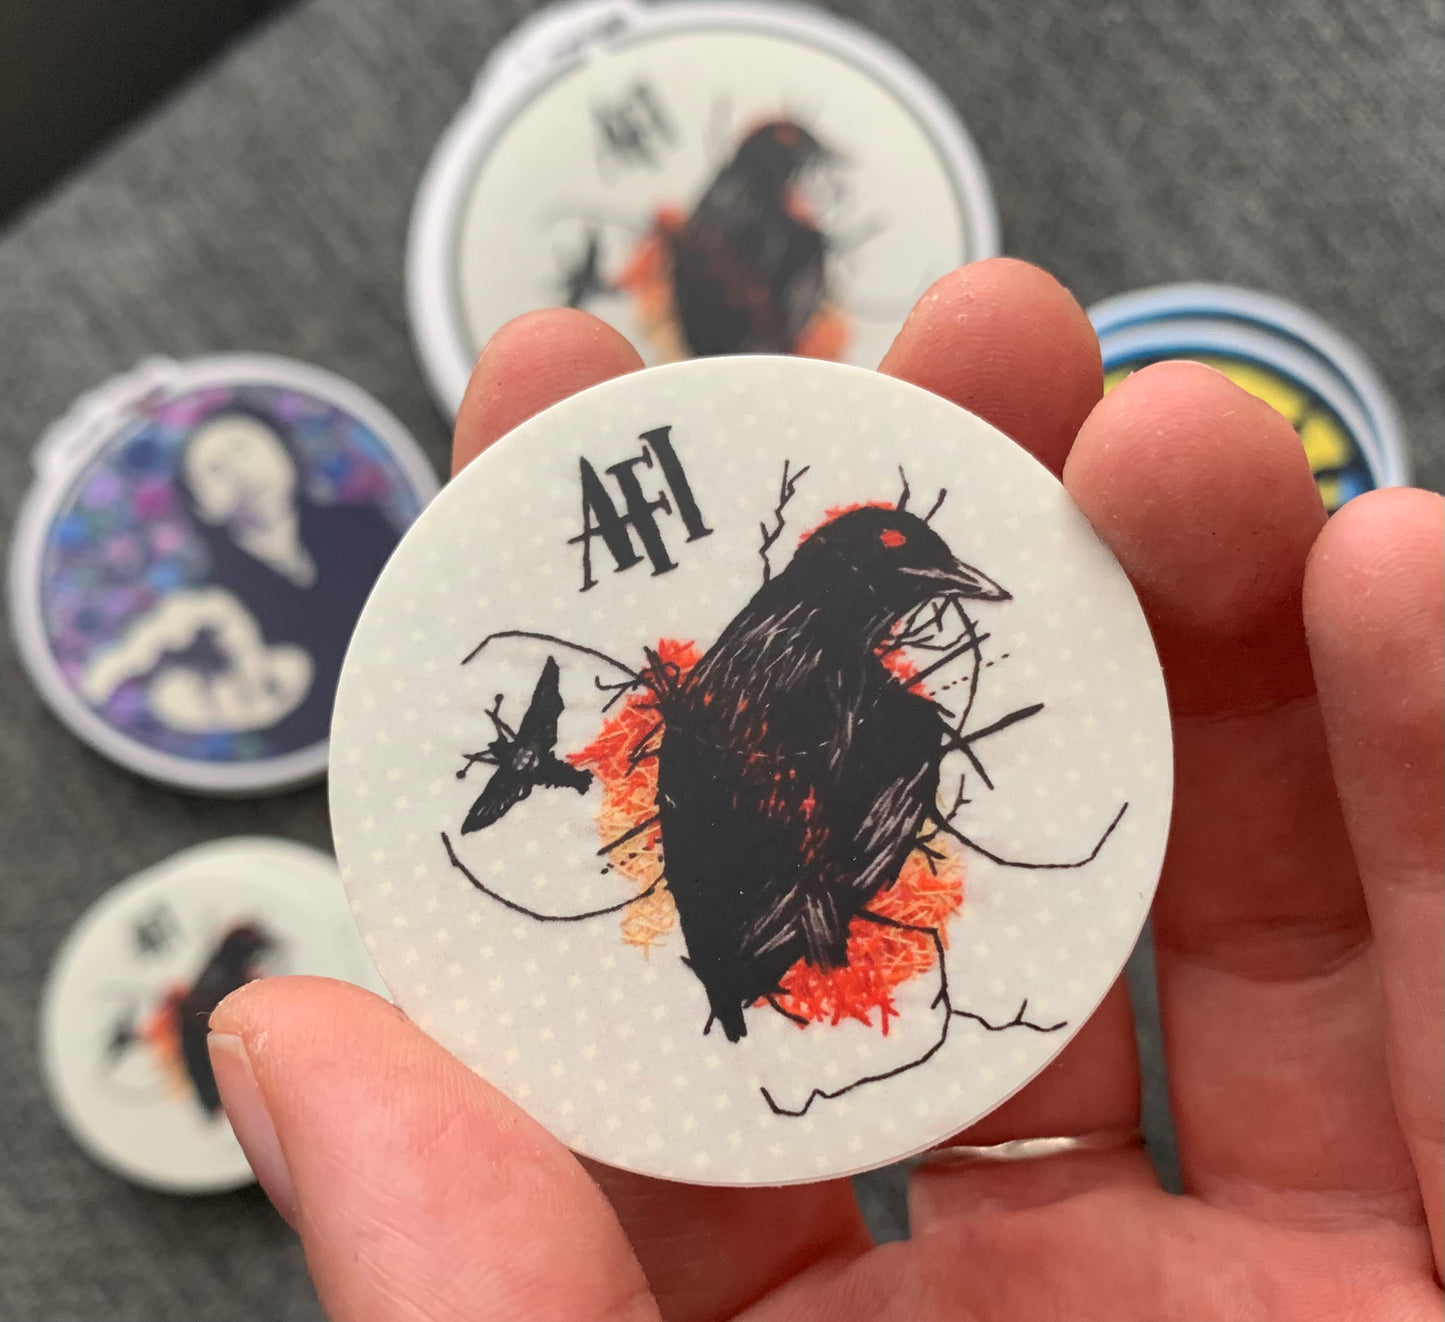 AFI crow design from "I heard a voice" which has been embroidered by me, and then turned into a sticker